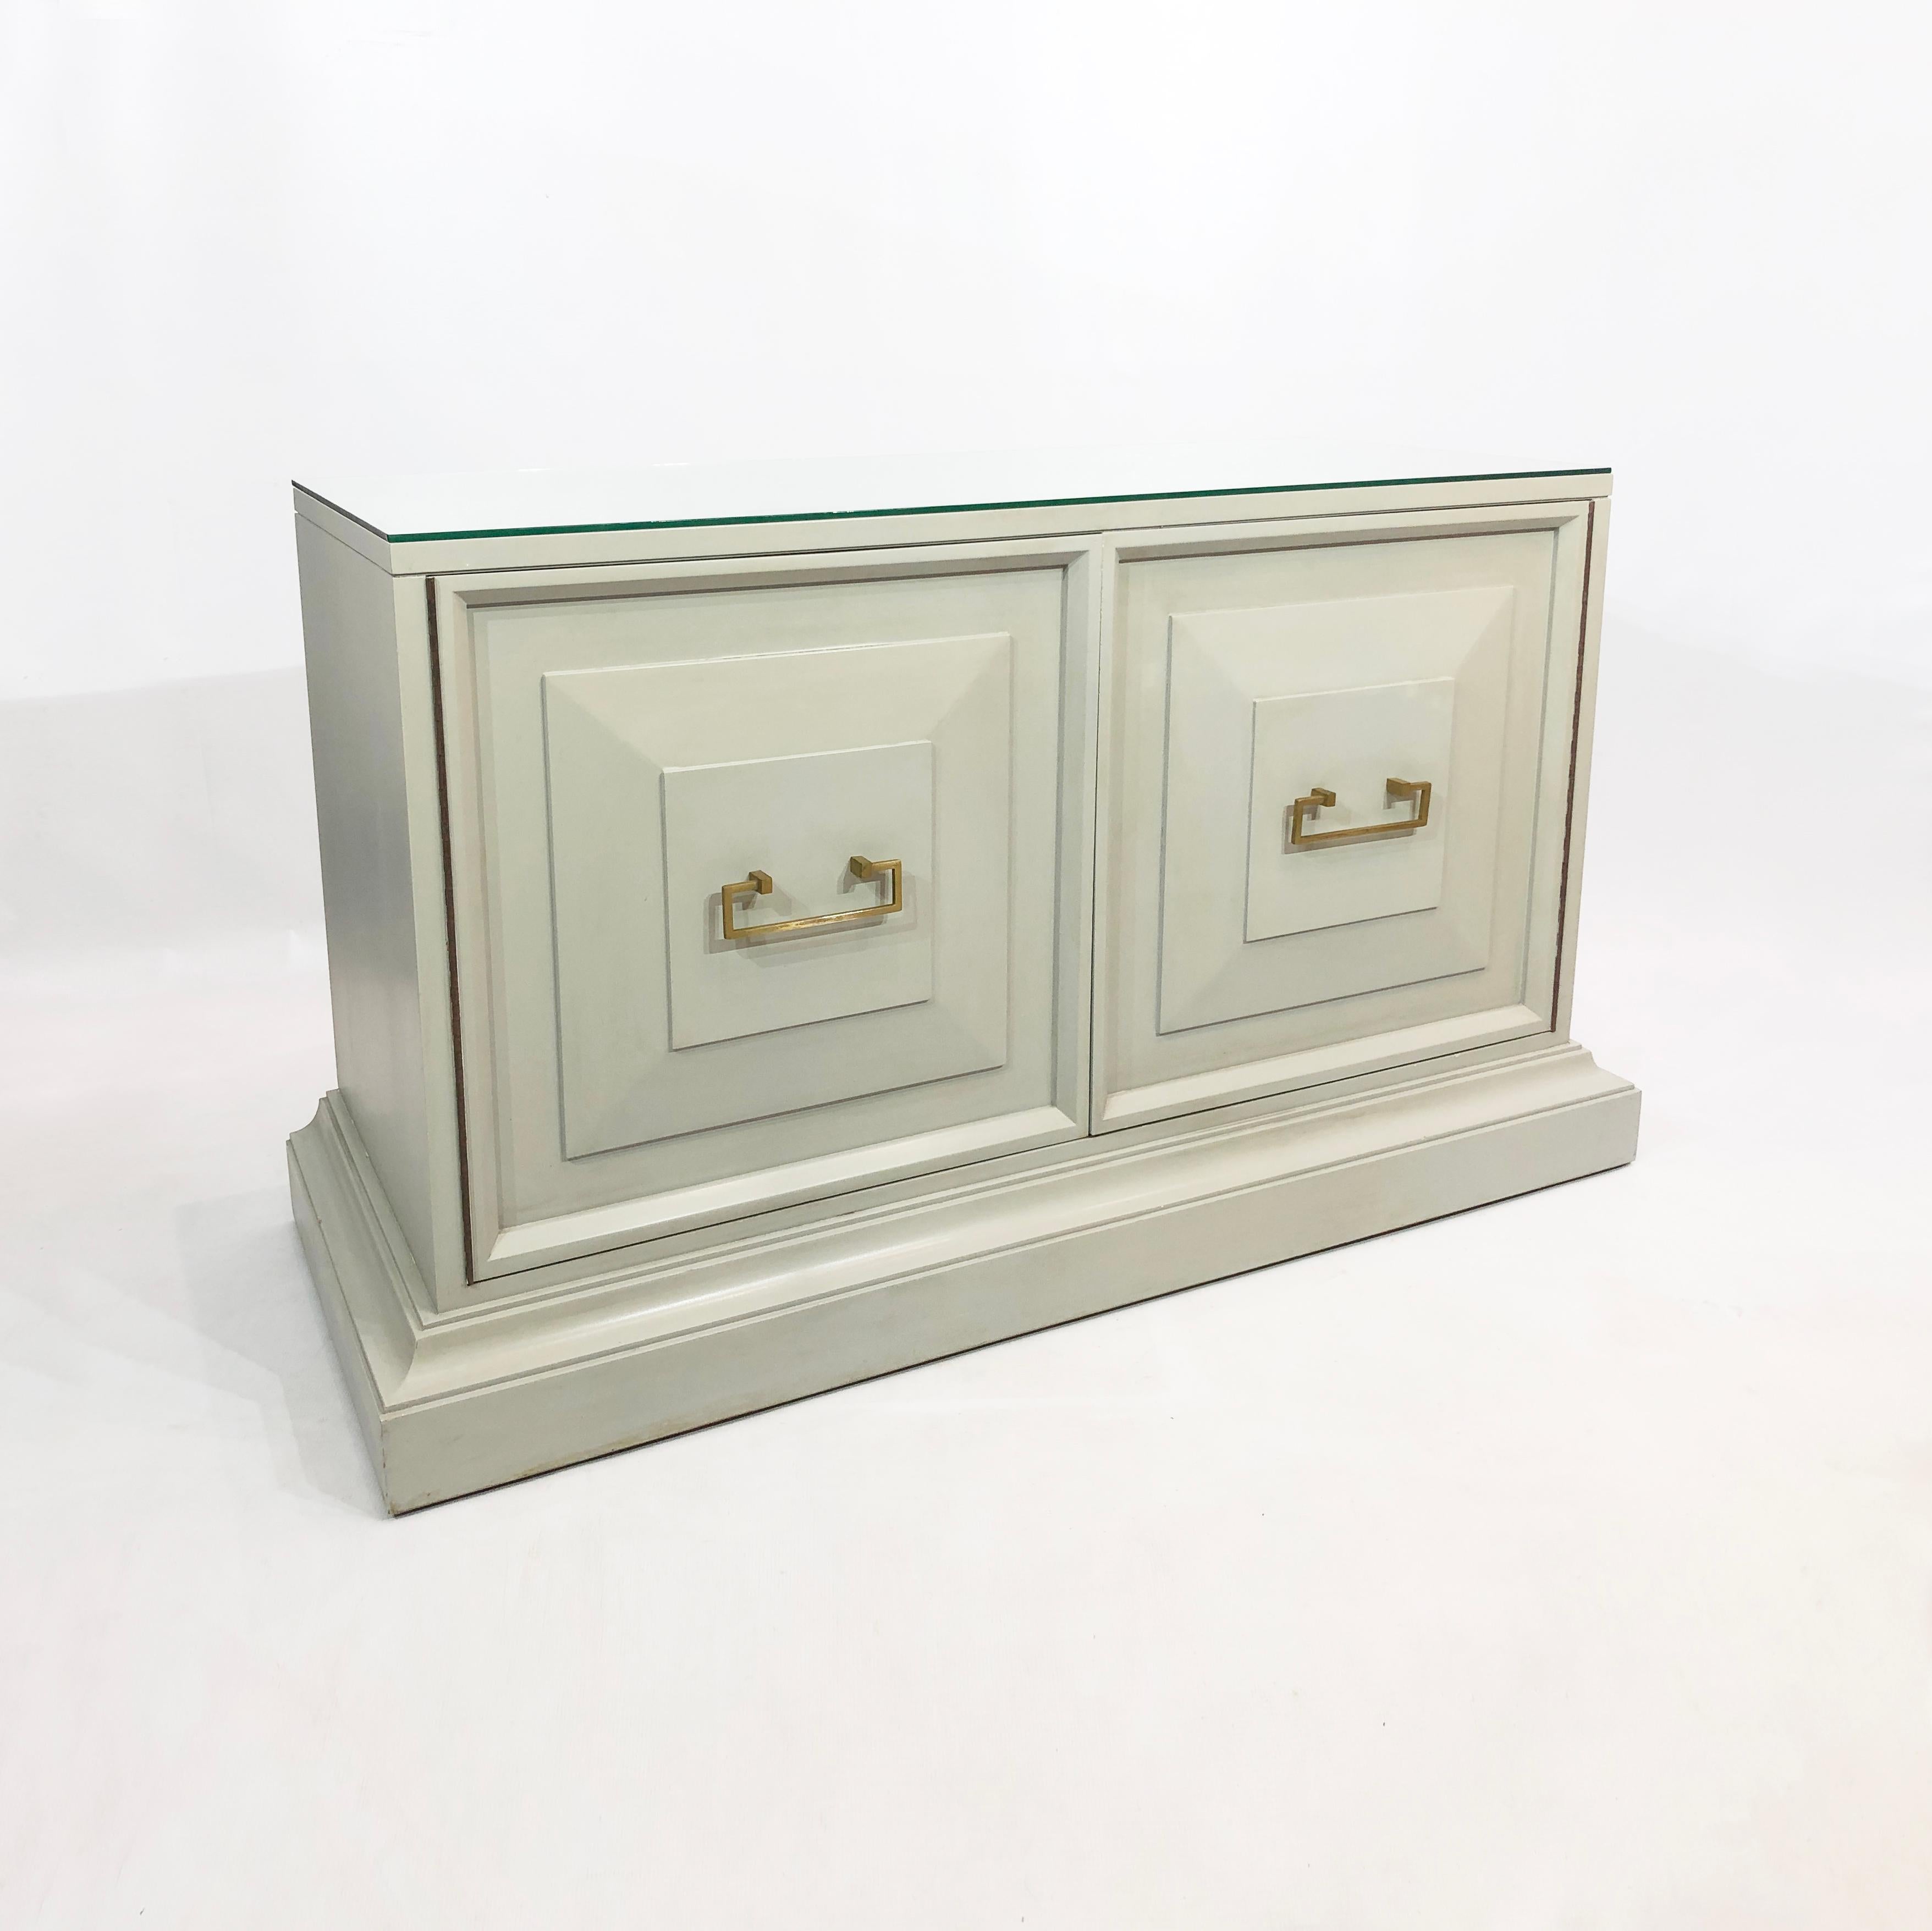 Neoclassical Cabinet on Plinth 1960s Midcentury Chinoiserie Sideboard Brass 1970 For Sale 3